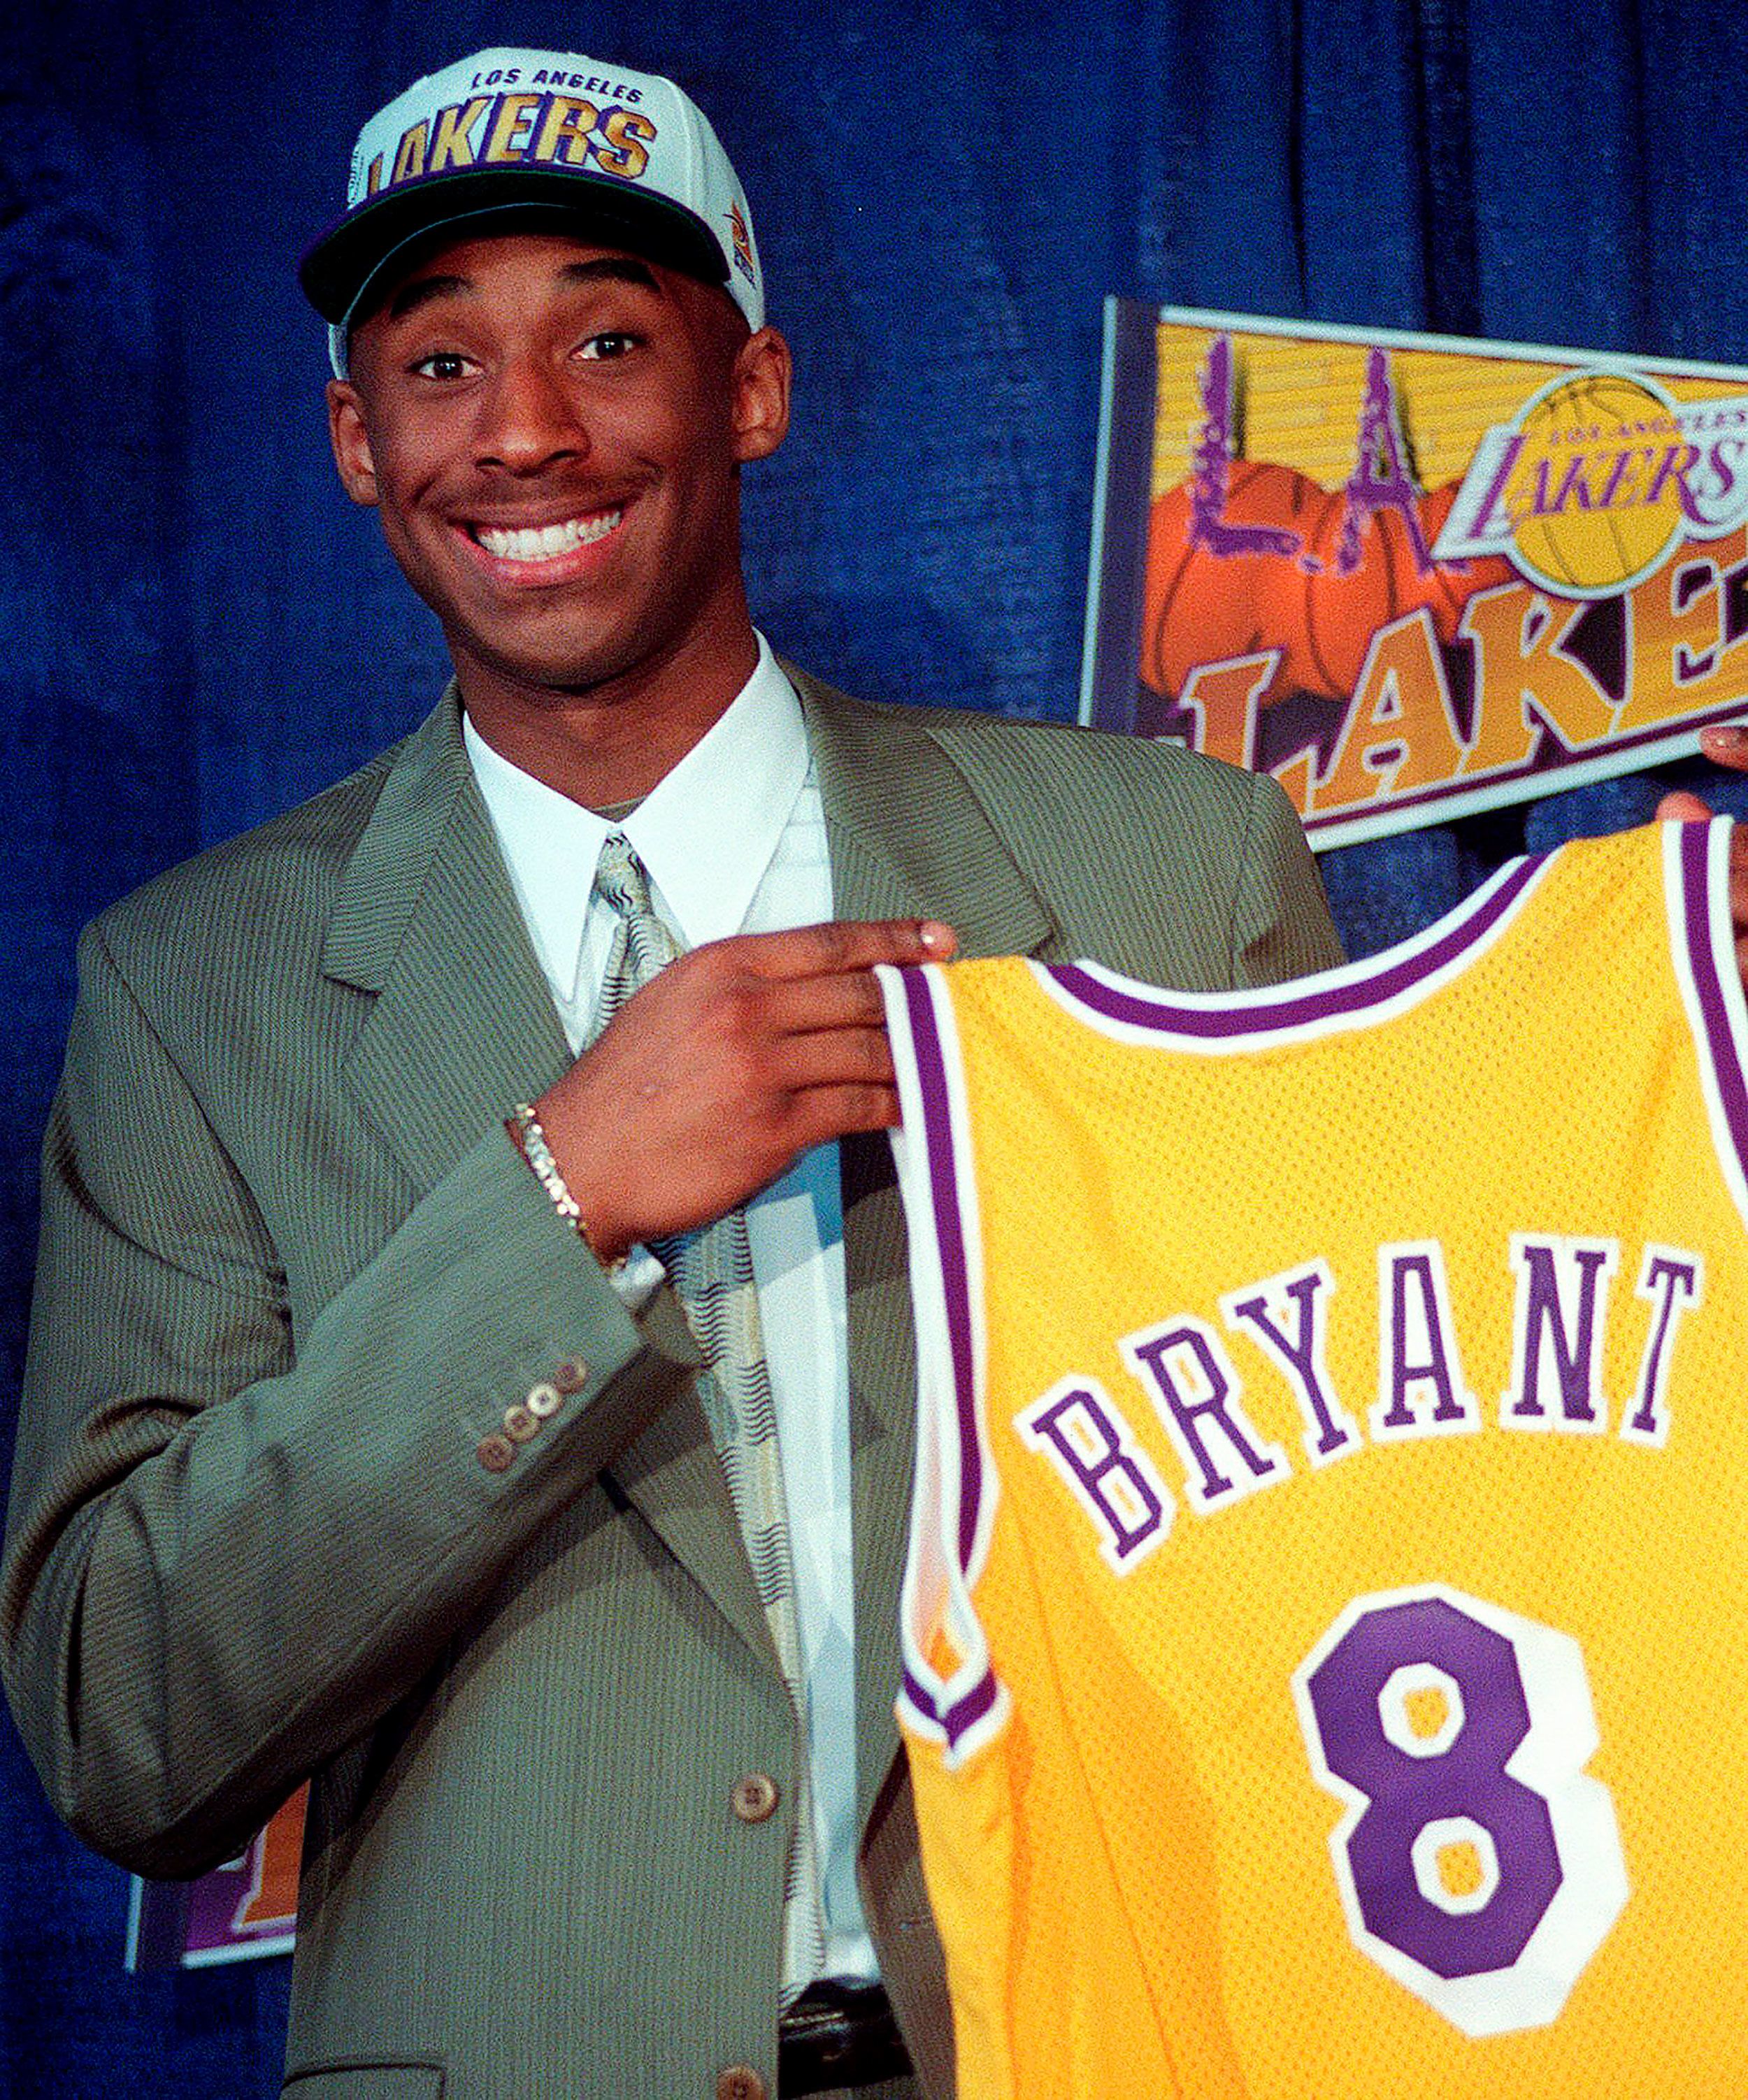 Being a great basketball player wasn't enough for Kobe Bryant